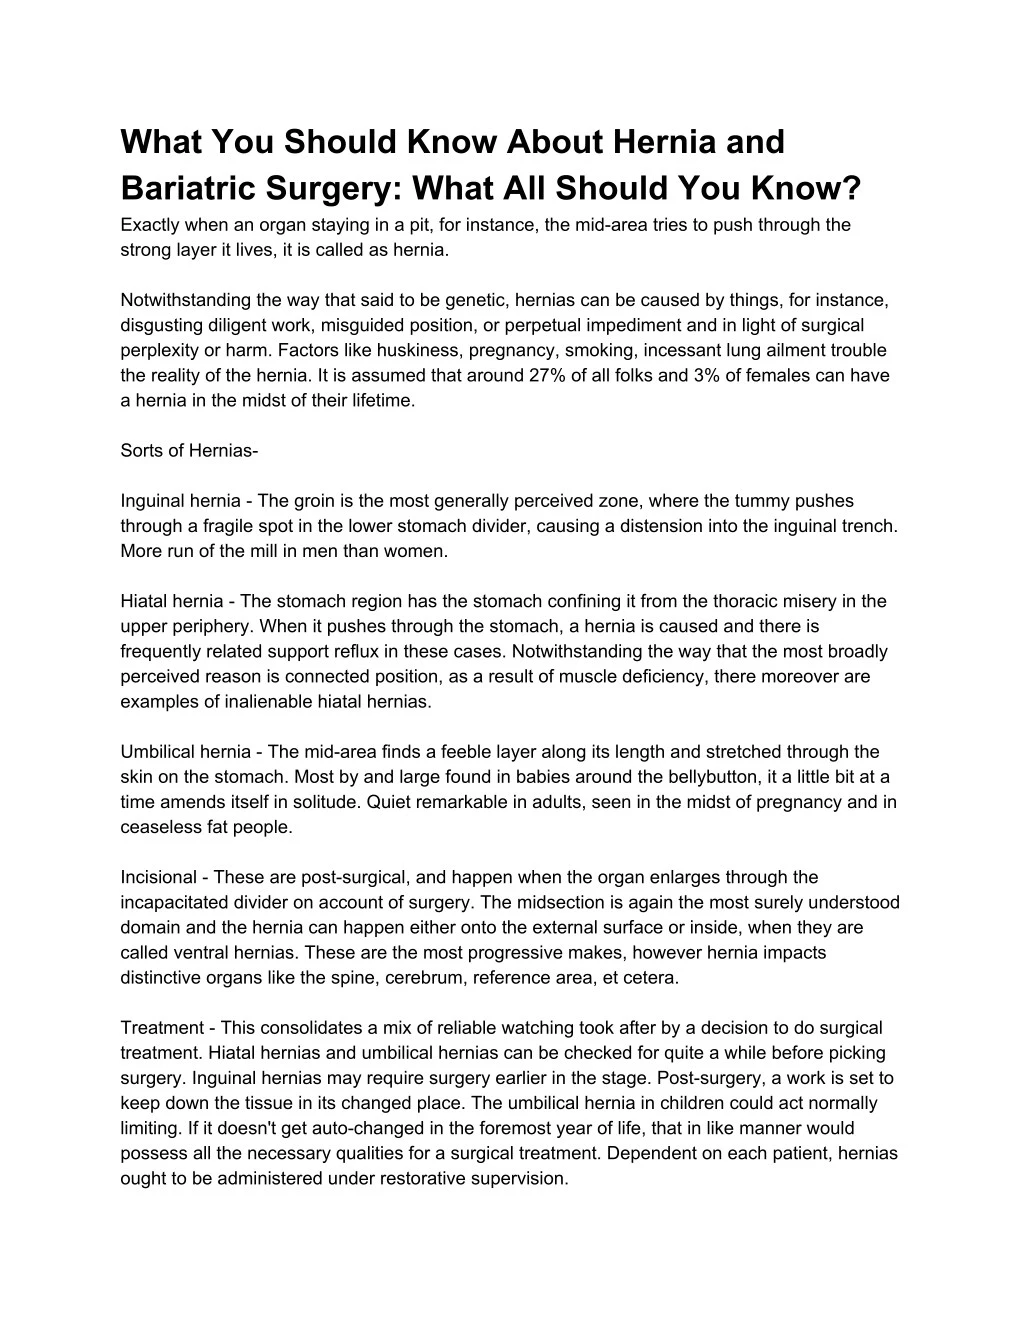 what you should know about hernia and bariatric